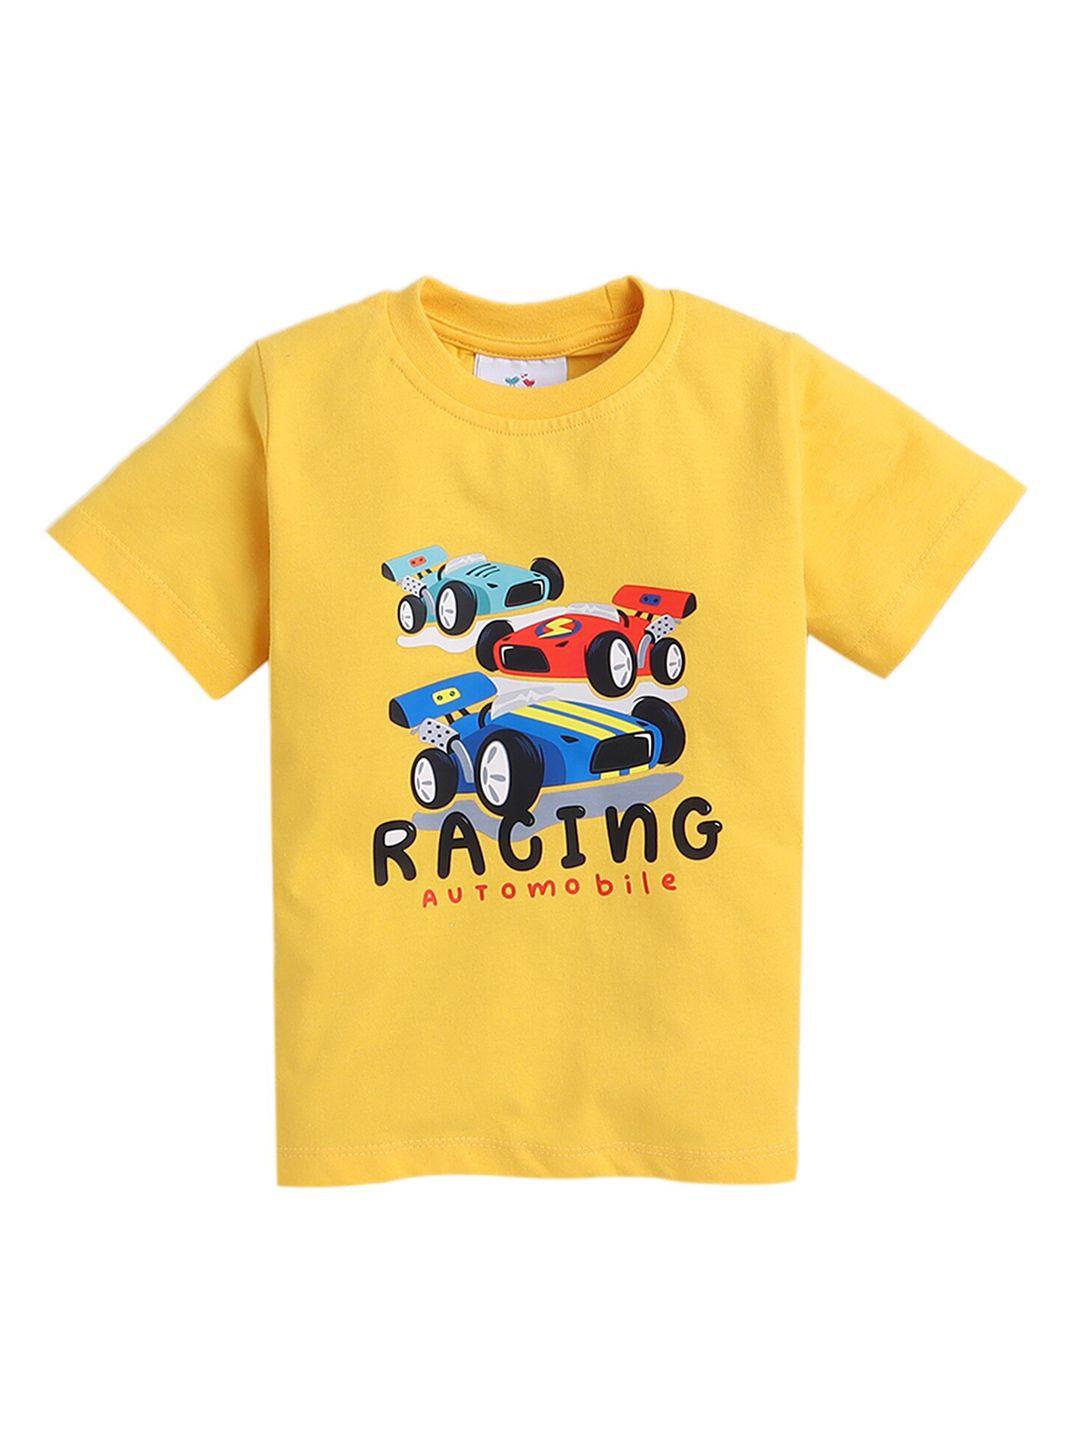 Knitting Doodles Boys Graphic Printed Round Neck Regular Fit Cotton T-Shirt